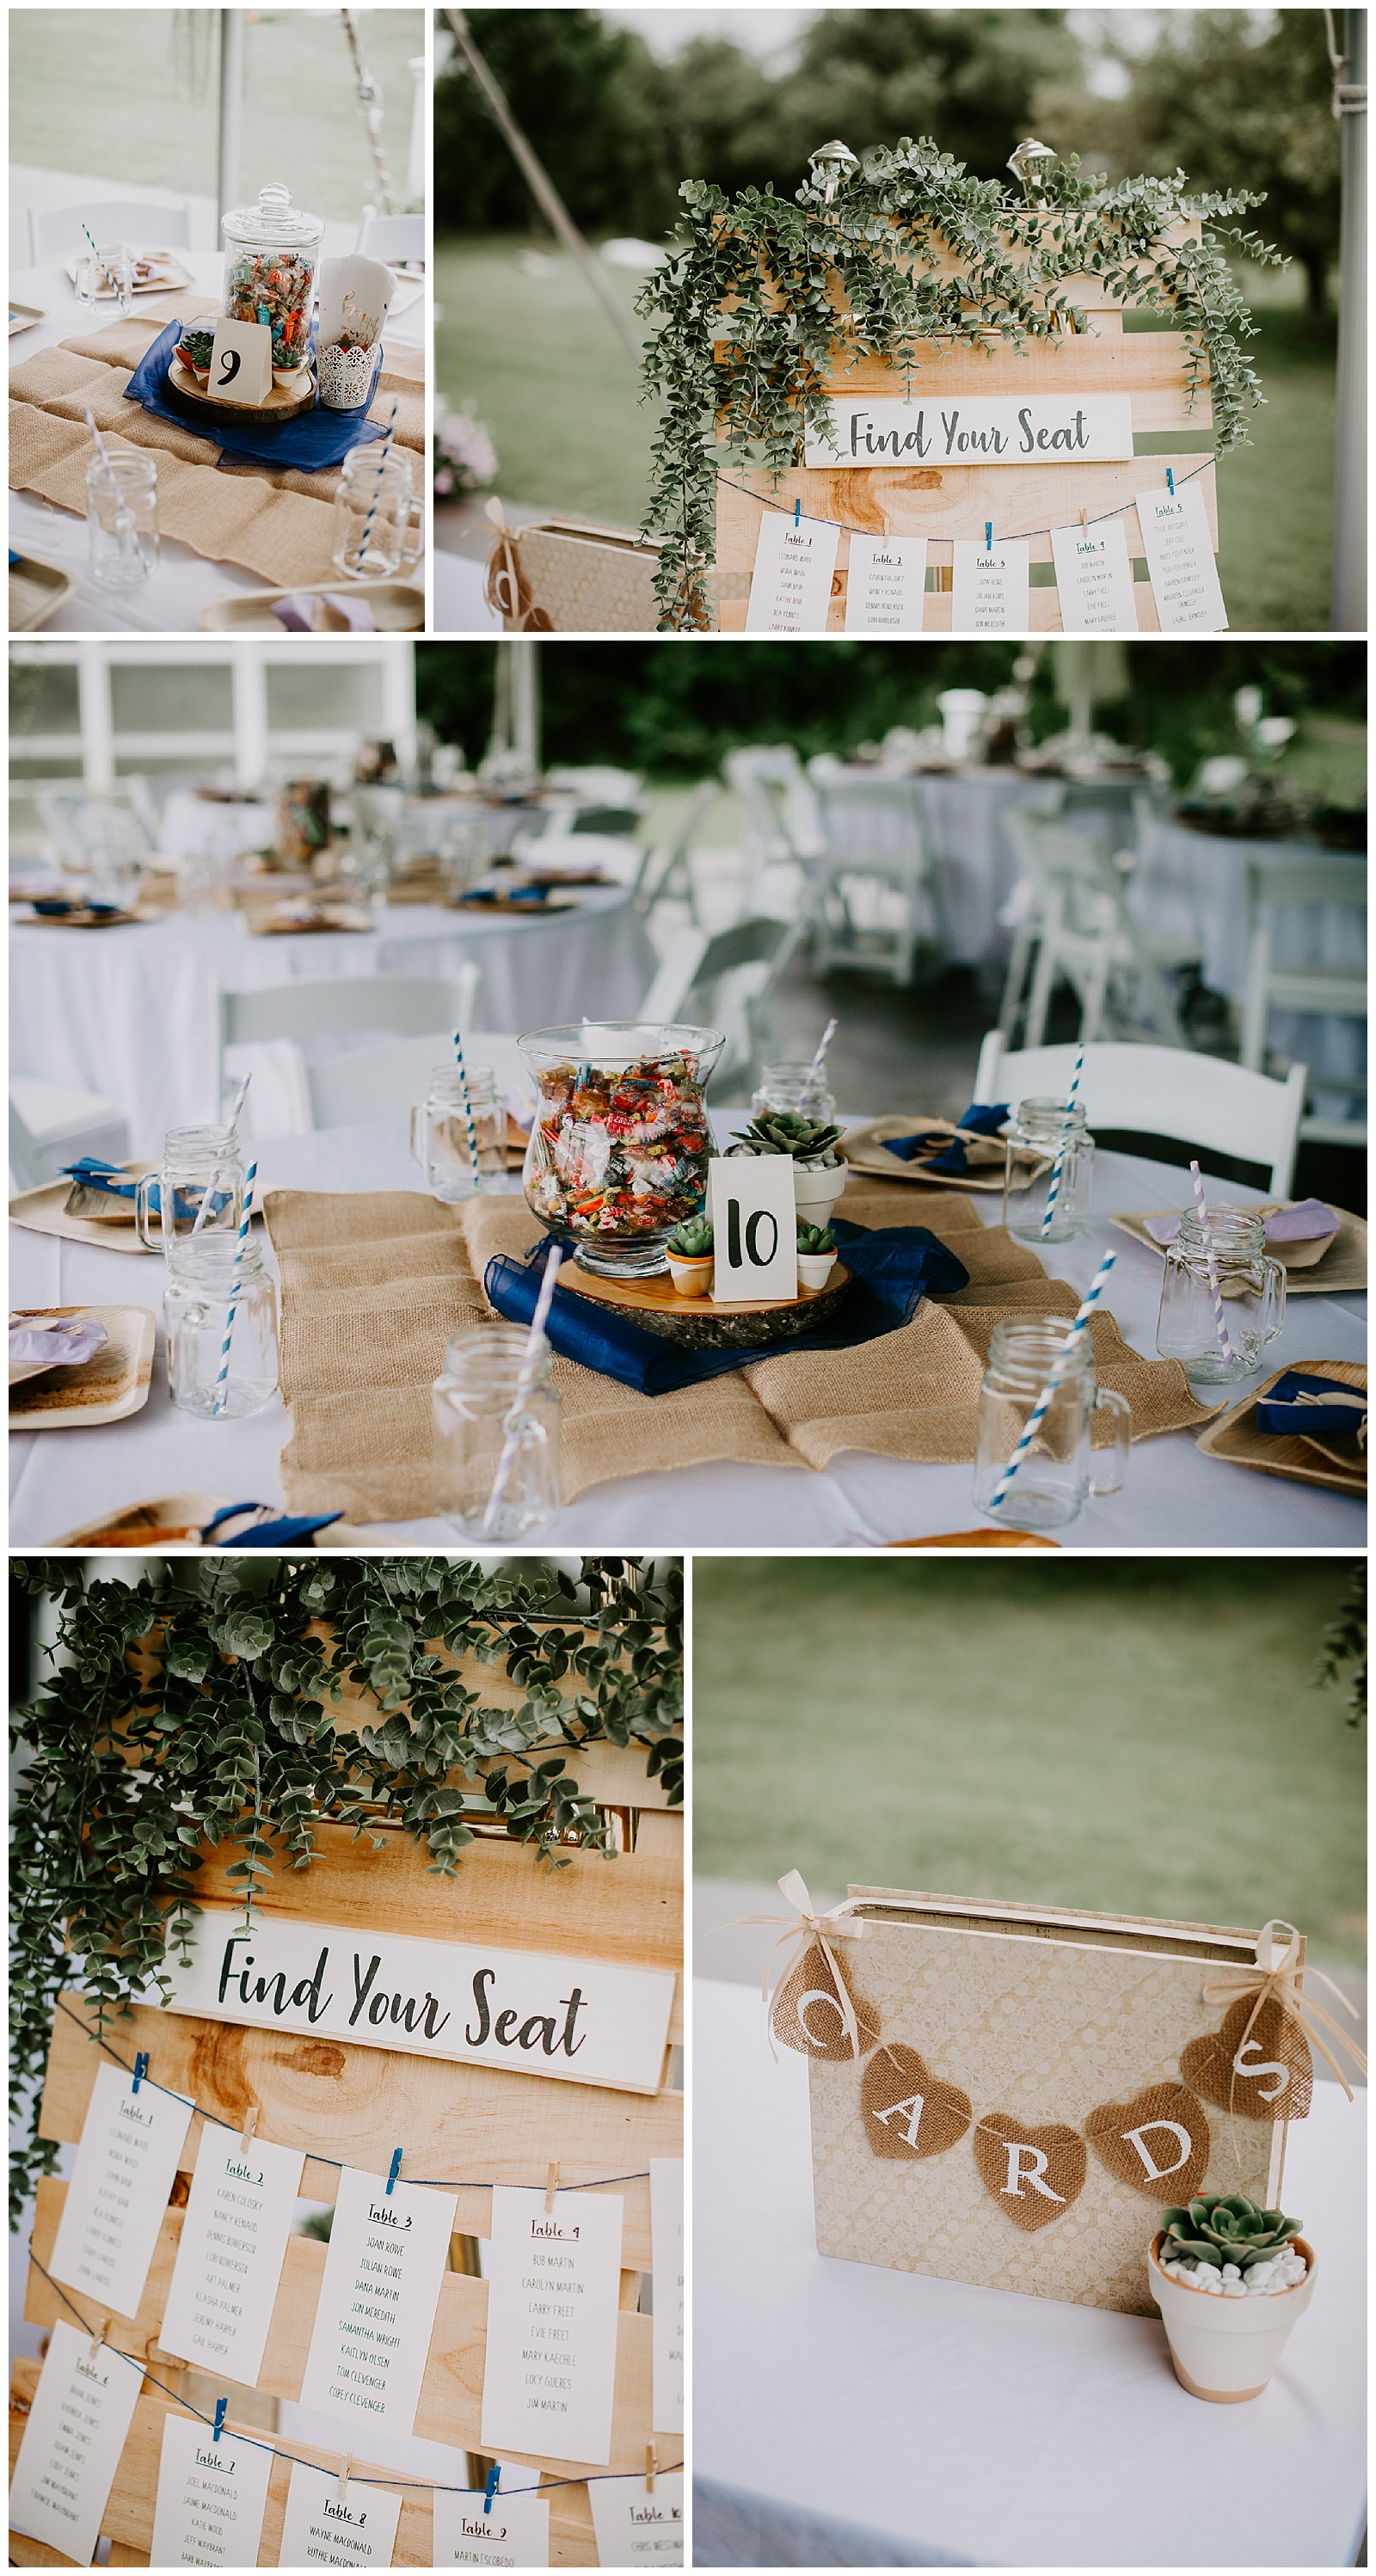 Wedding Details with succulents, eco friendly plates, at Apple blossom chapel in Fennville Michigan